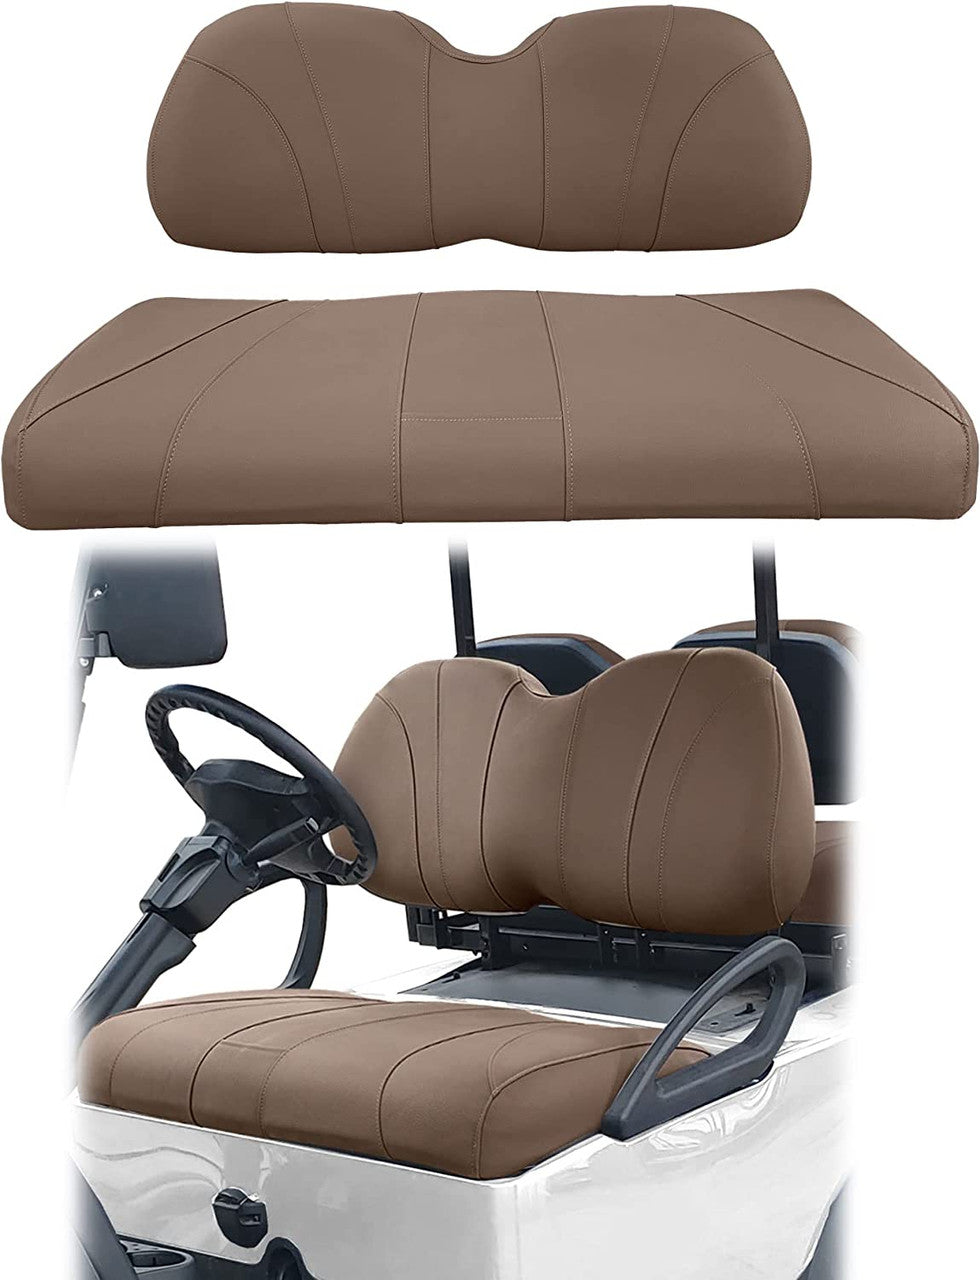 SlipStream Front Seat Cover Set (Triple Chestnut) - Fits Yamaha G29/Drive & Drive2